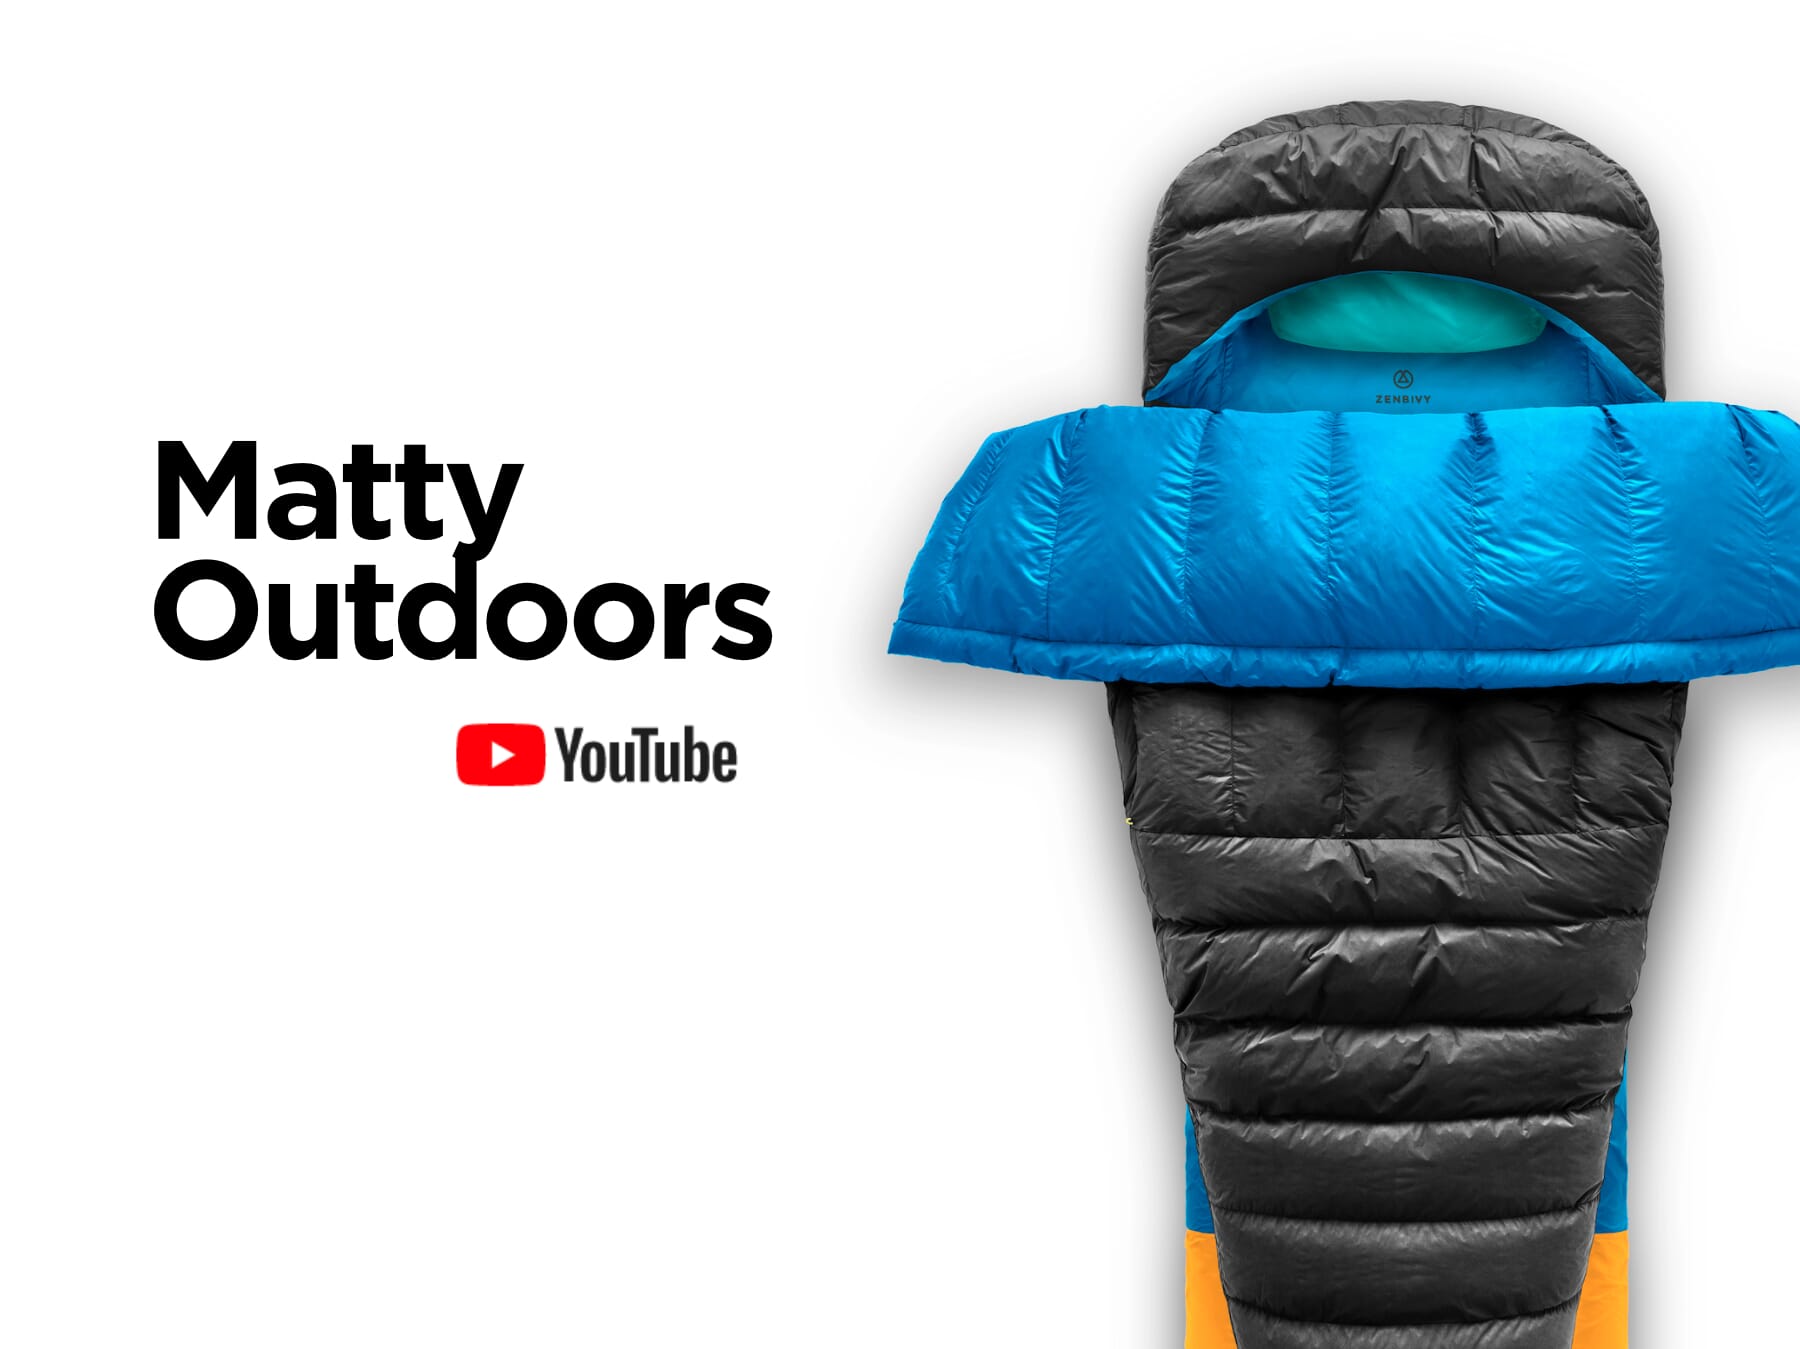 WATCH: Matty Outdoors "The Best Sleep You Will Ever Have Backpacking"!